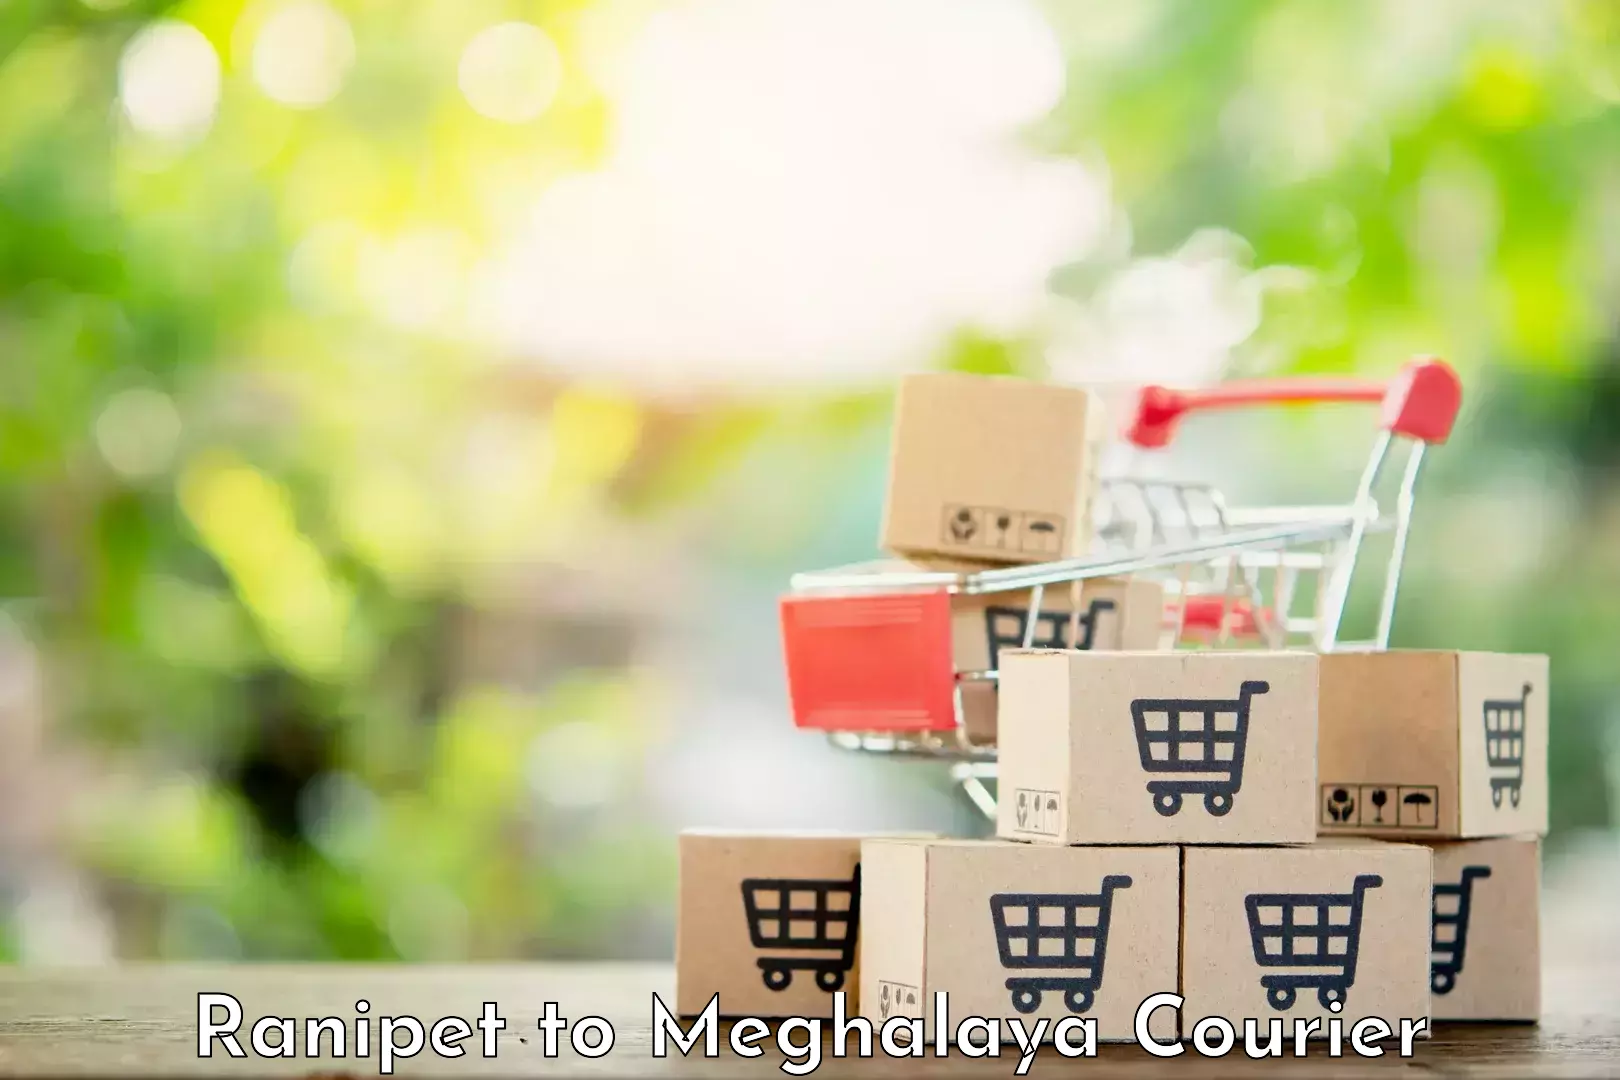 Smart parcel tracking in Ranipet to Meghalaya